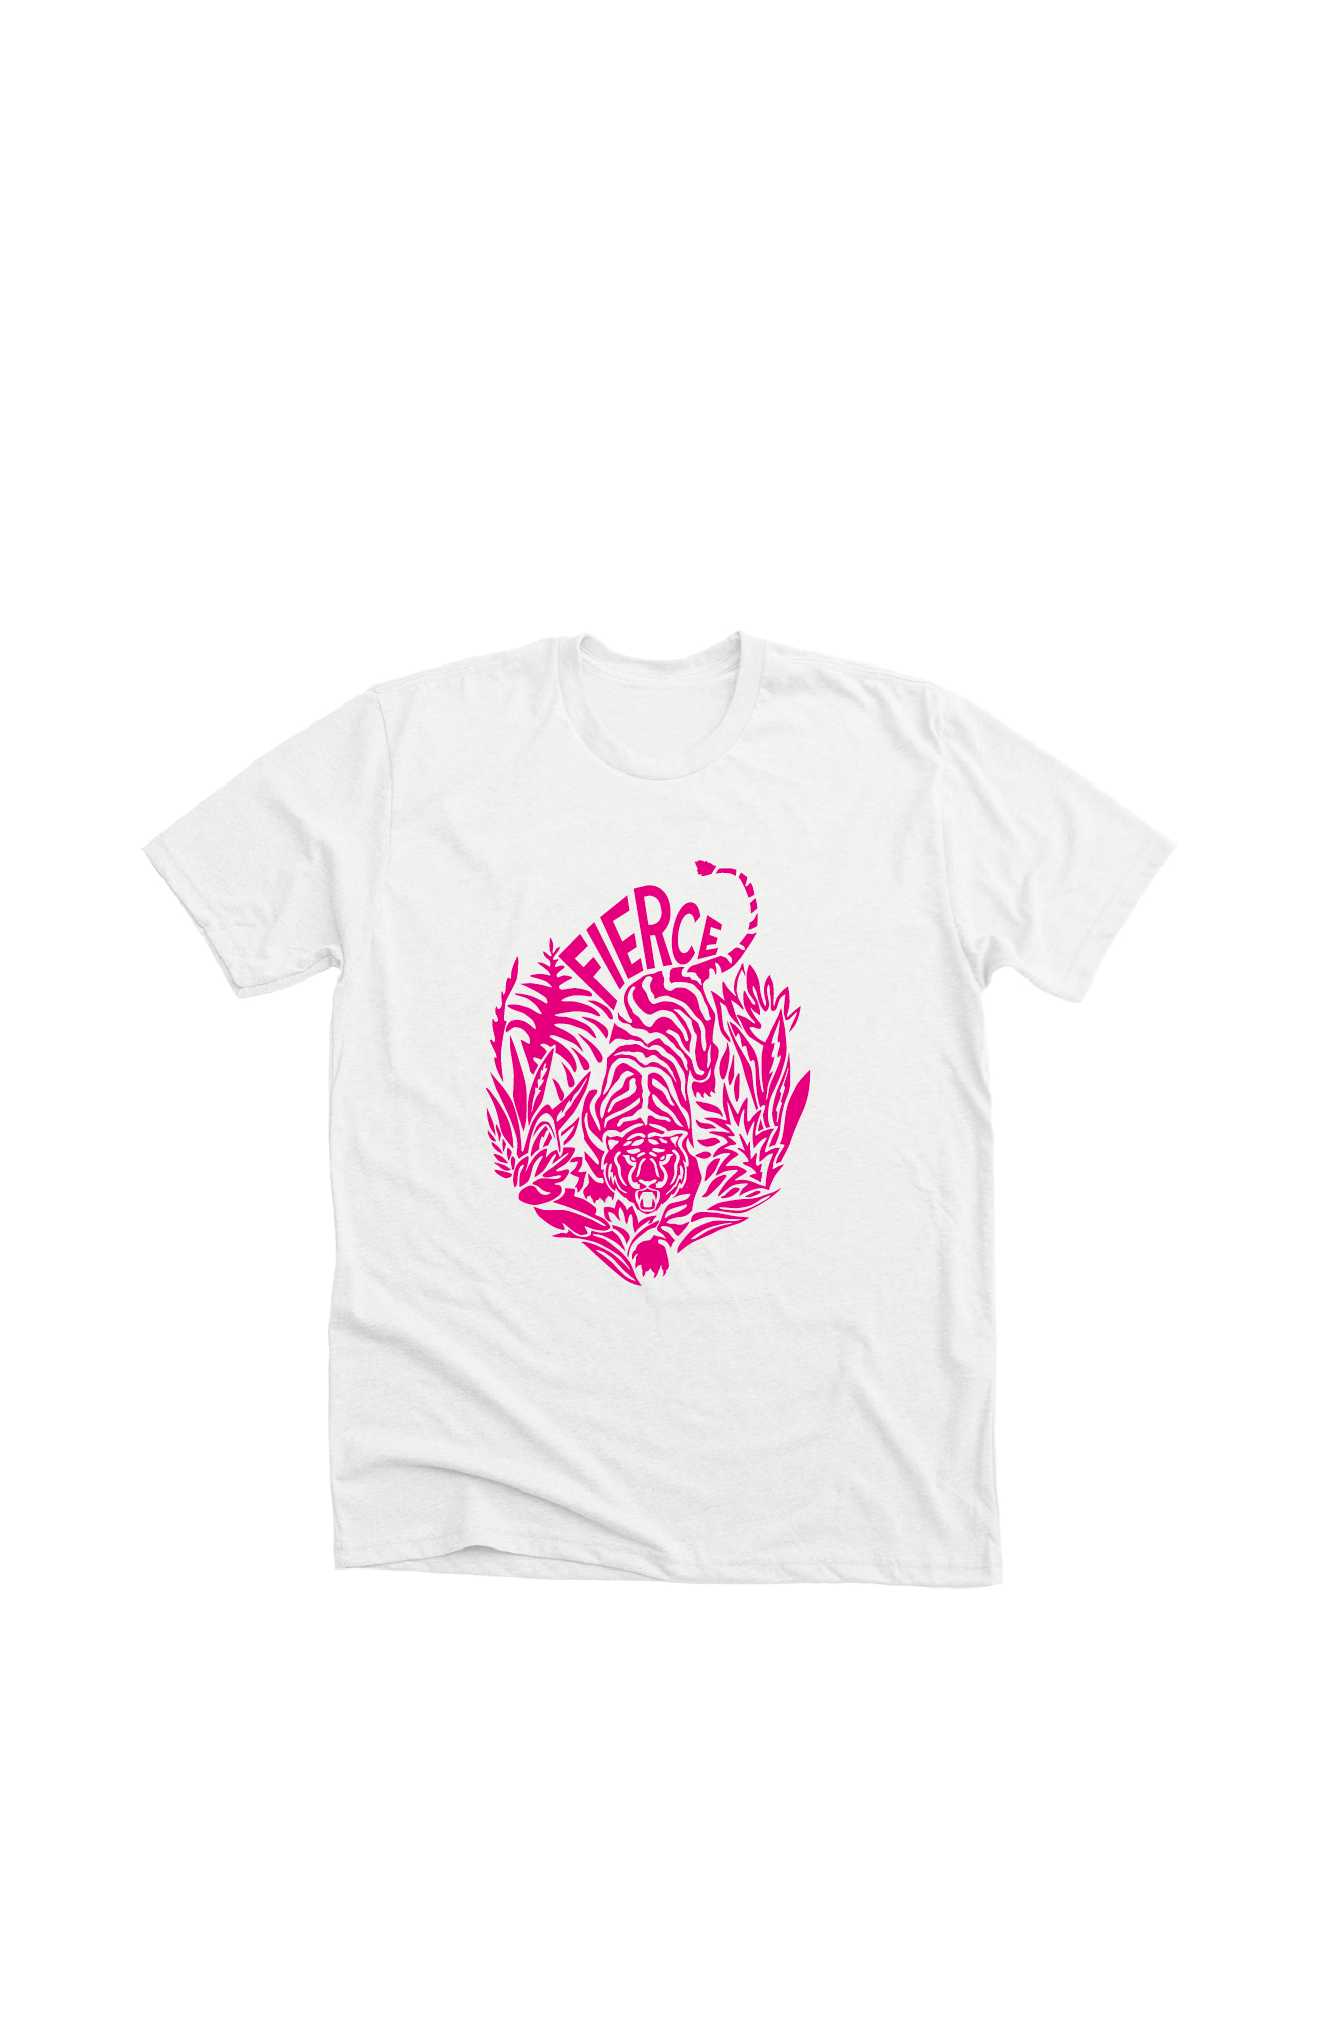 Unisex white t-shirt with a neon pink print of a tiger on the front